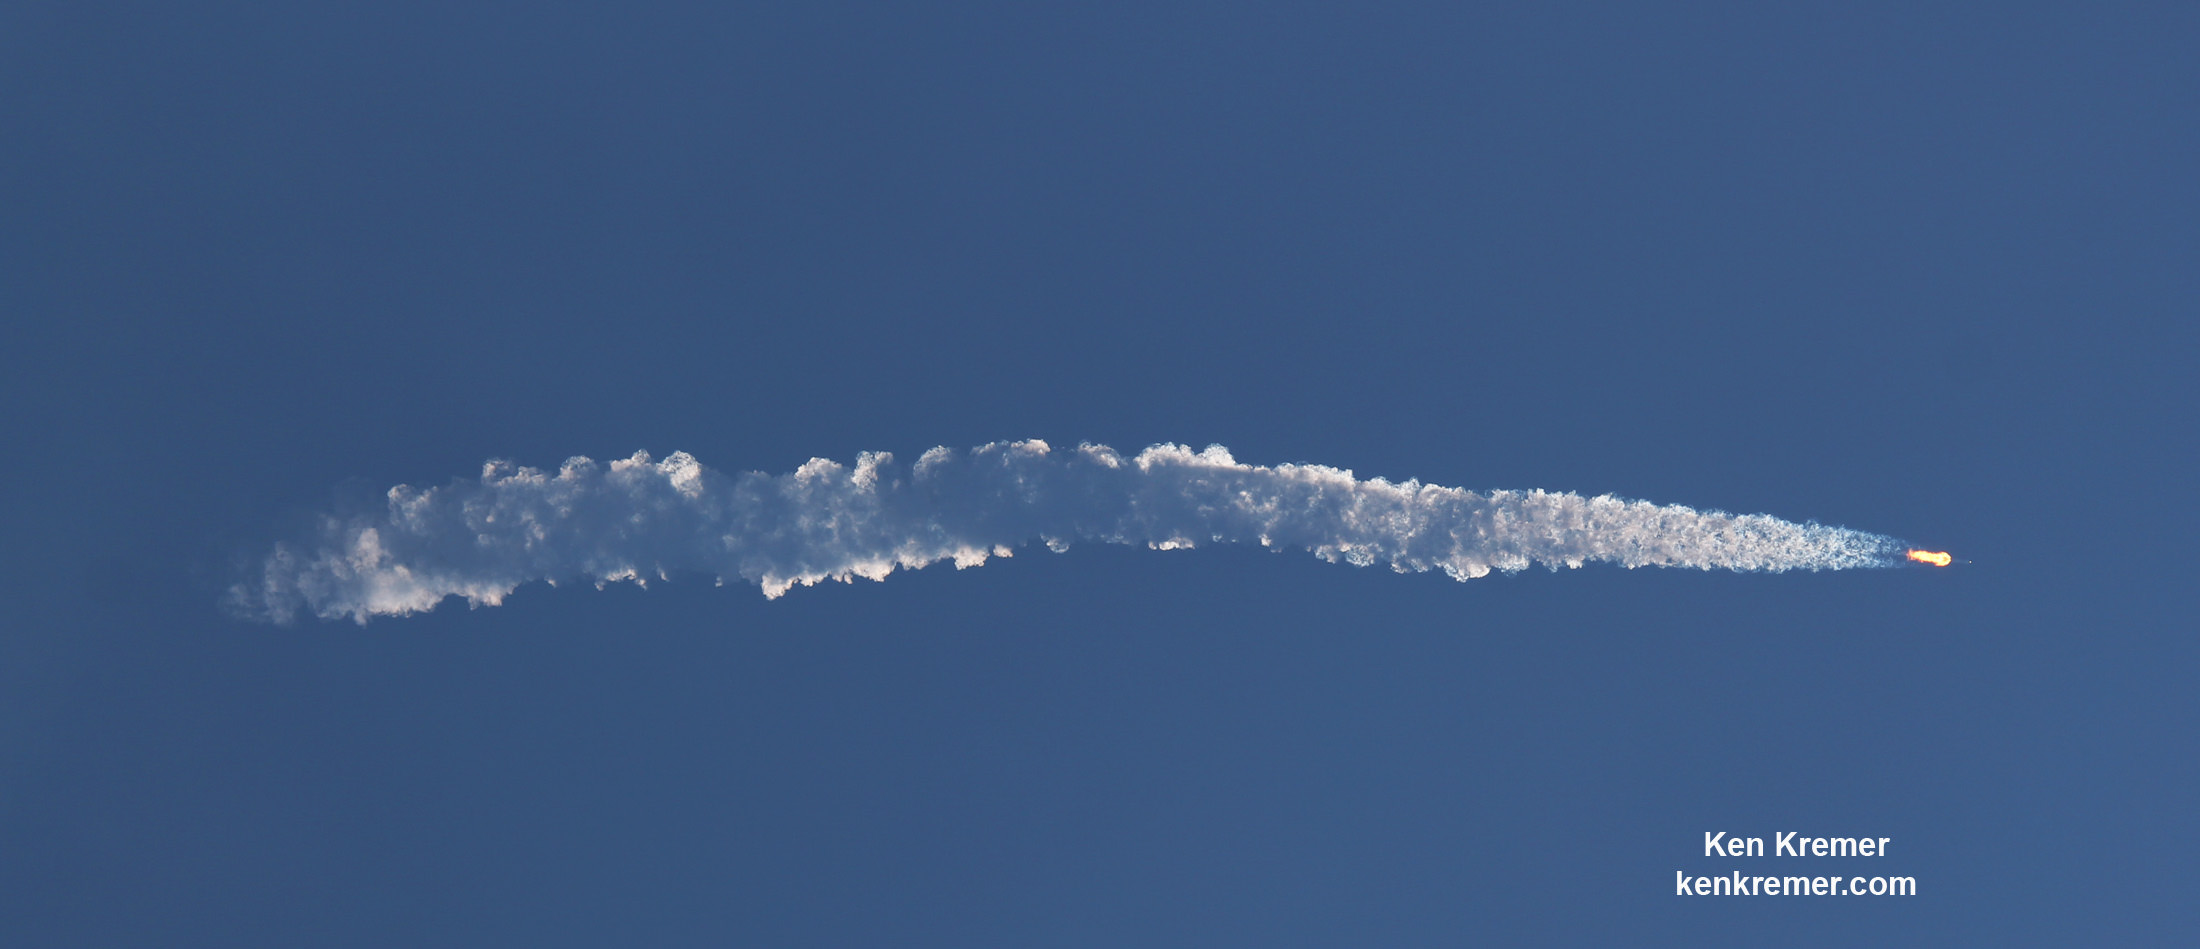 SpaceX Falocn 9 streaks to orbit across the Florida skies after Eutelsat/ABS 2A comsat  launch  on June 15, 2016 from Cape Canaveral Air Force Station, Fl.   Credit: Ken Kremer/kenkremer.com